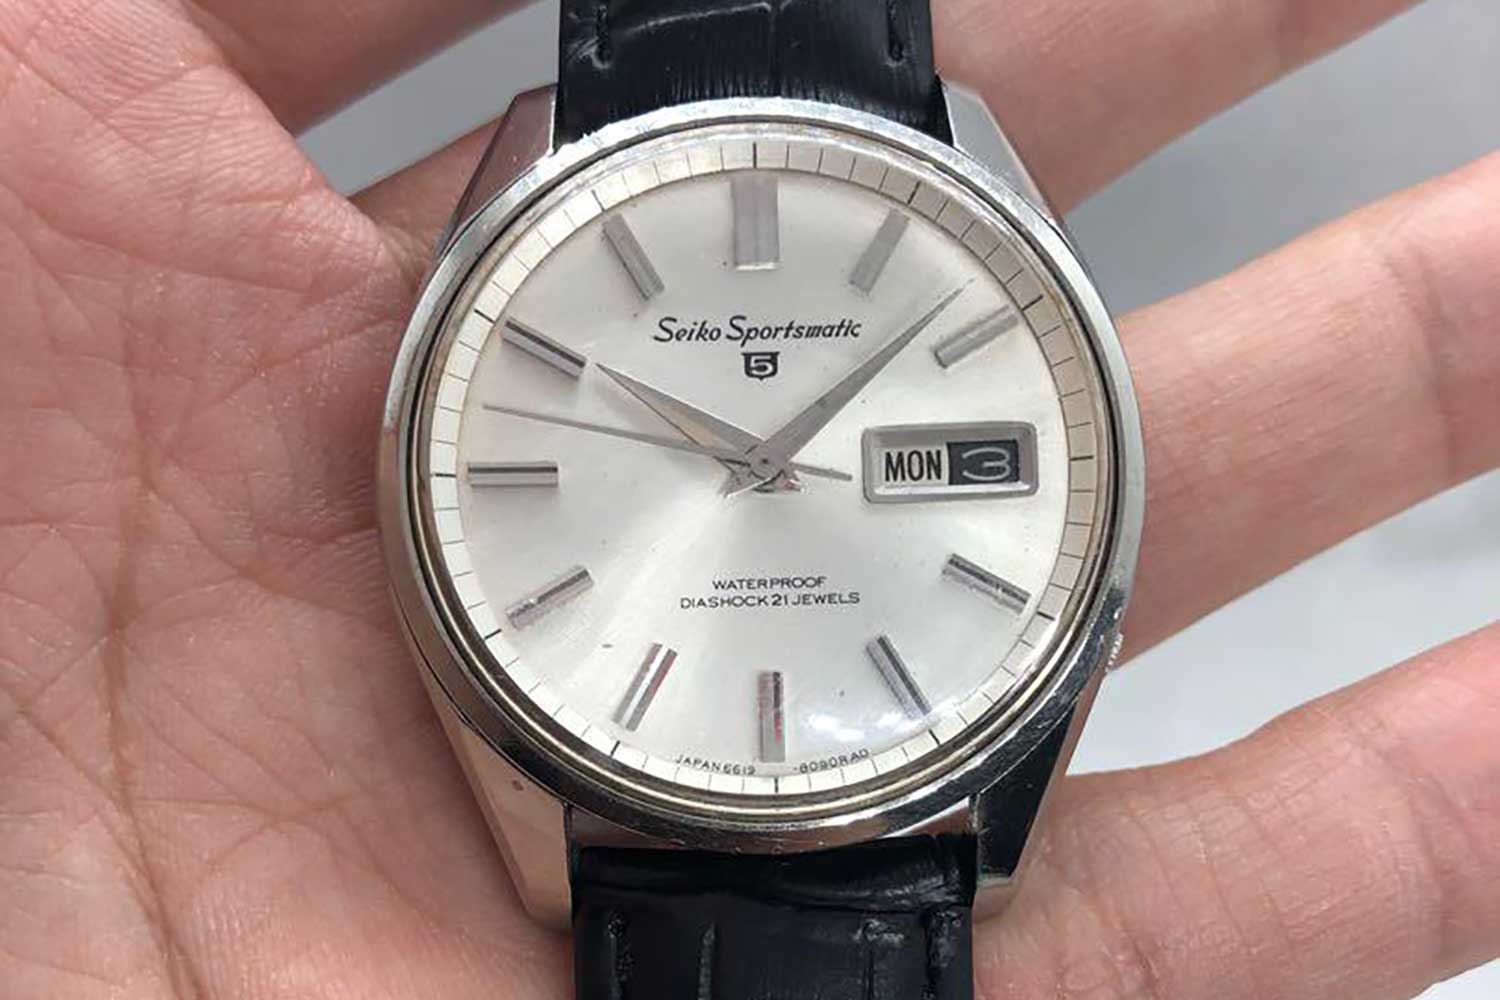 Seiko Sportsmatic 5 Vintage 1965 Silver 36mm Automatic (Image: Carousell)